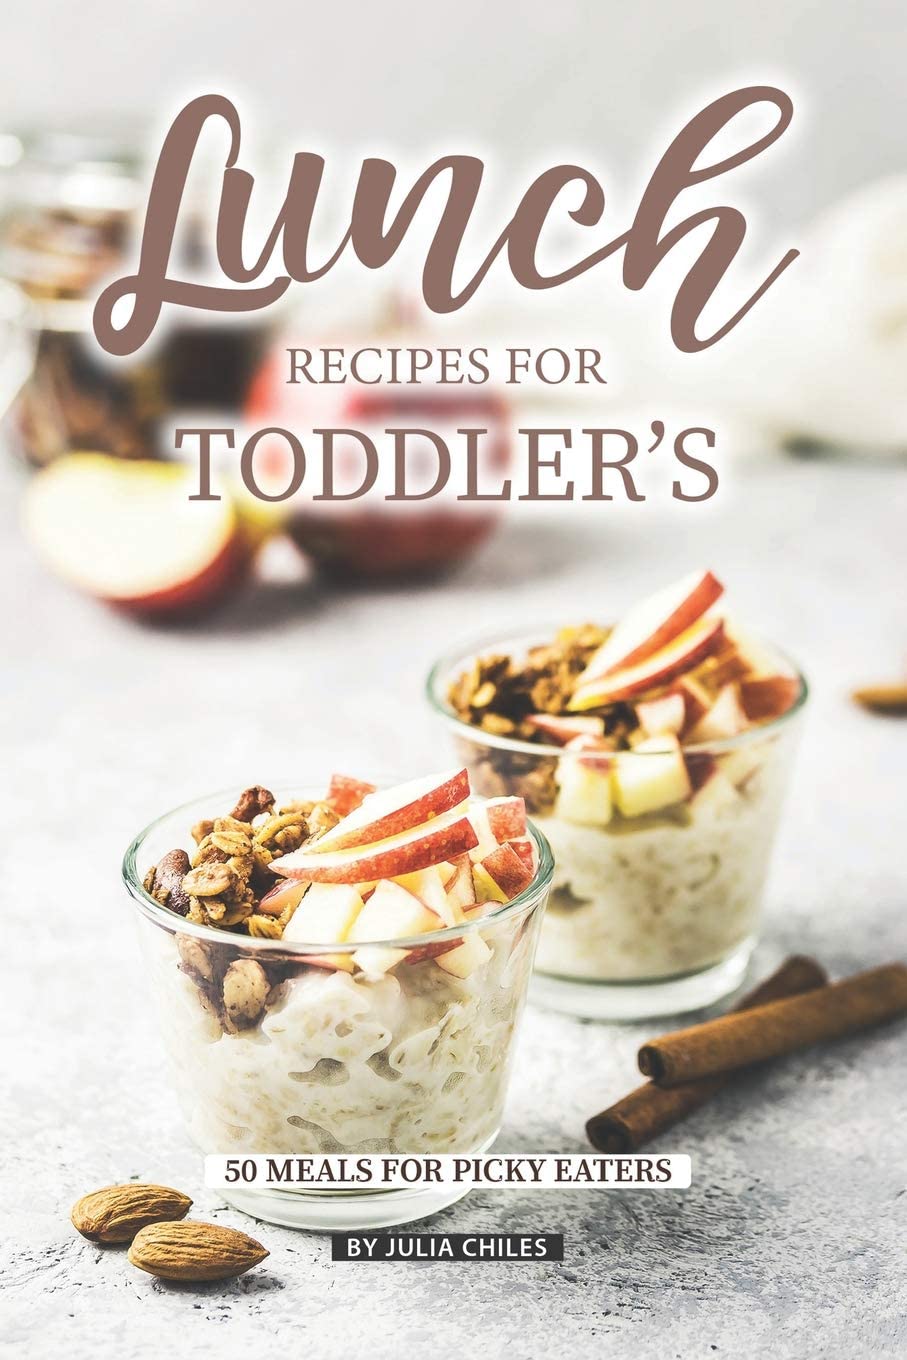 Lunch Recipes for Toddler’s: 50 Meals for Picky Eaters